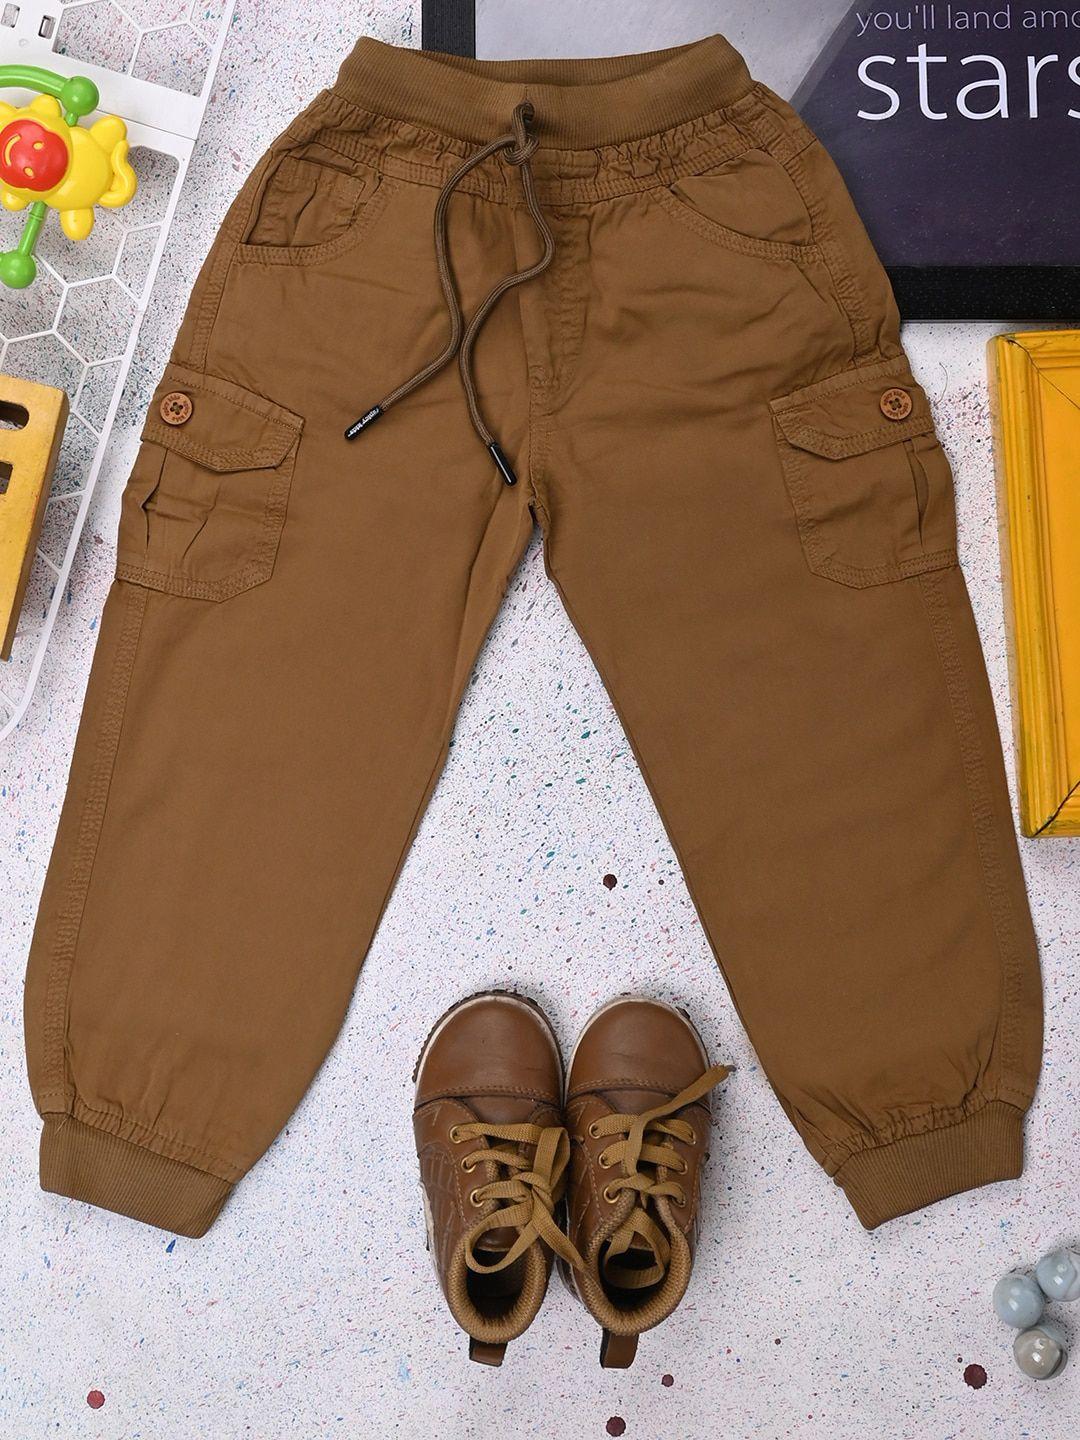 v-mart boys twill mid rise cotton cargos trousers